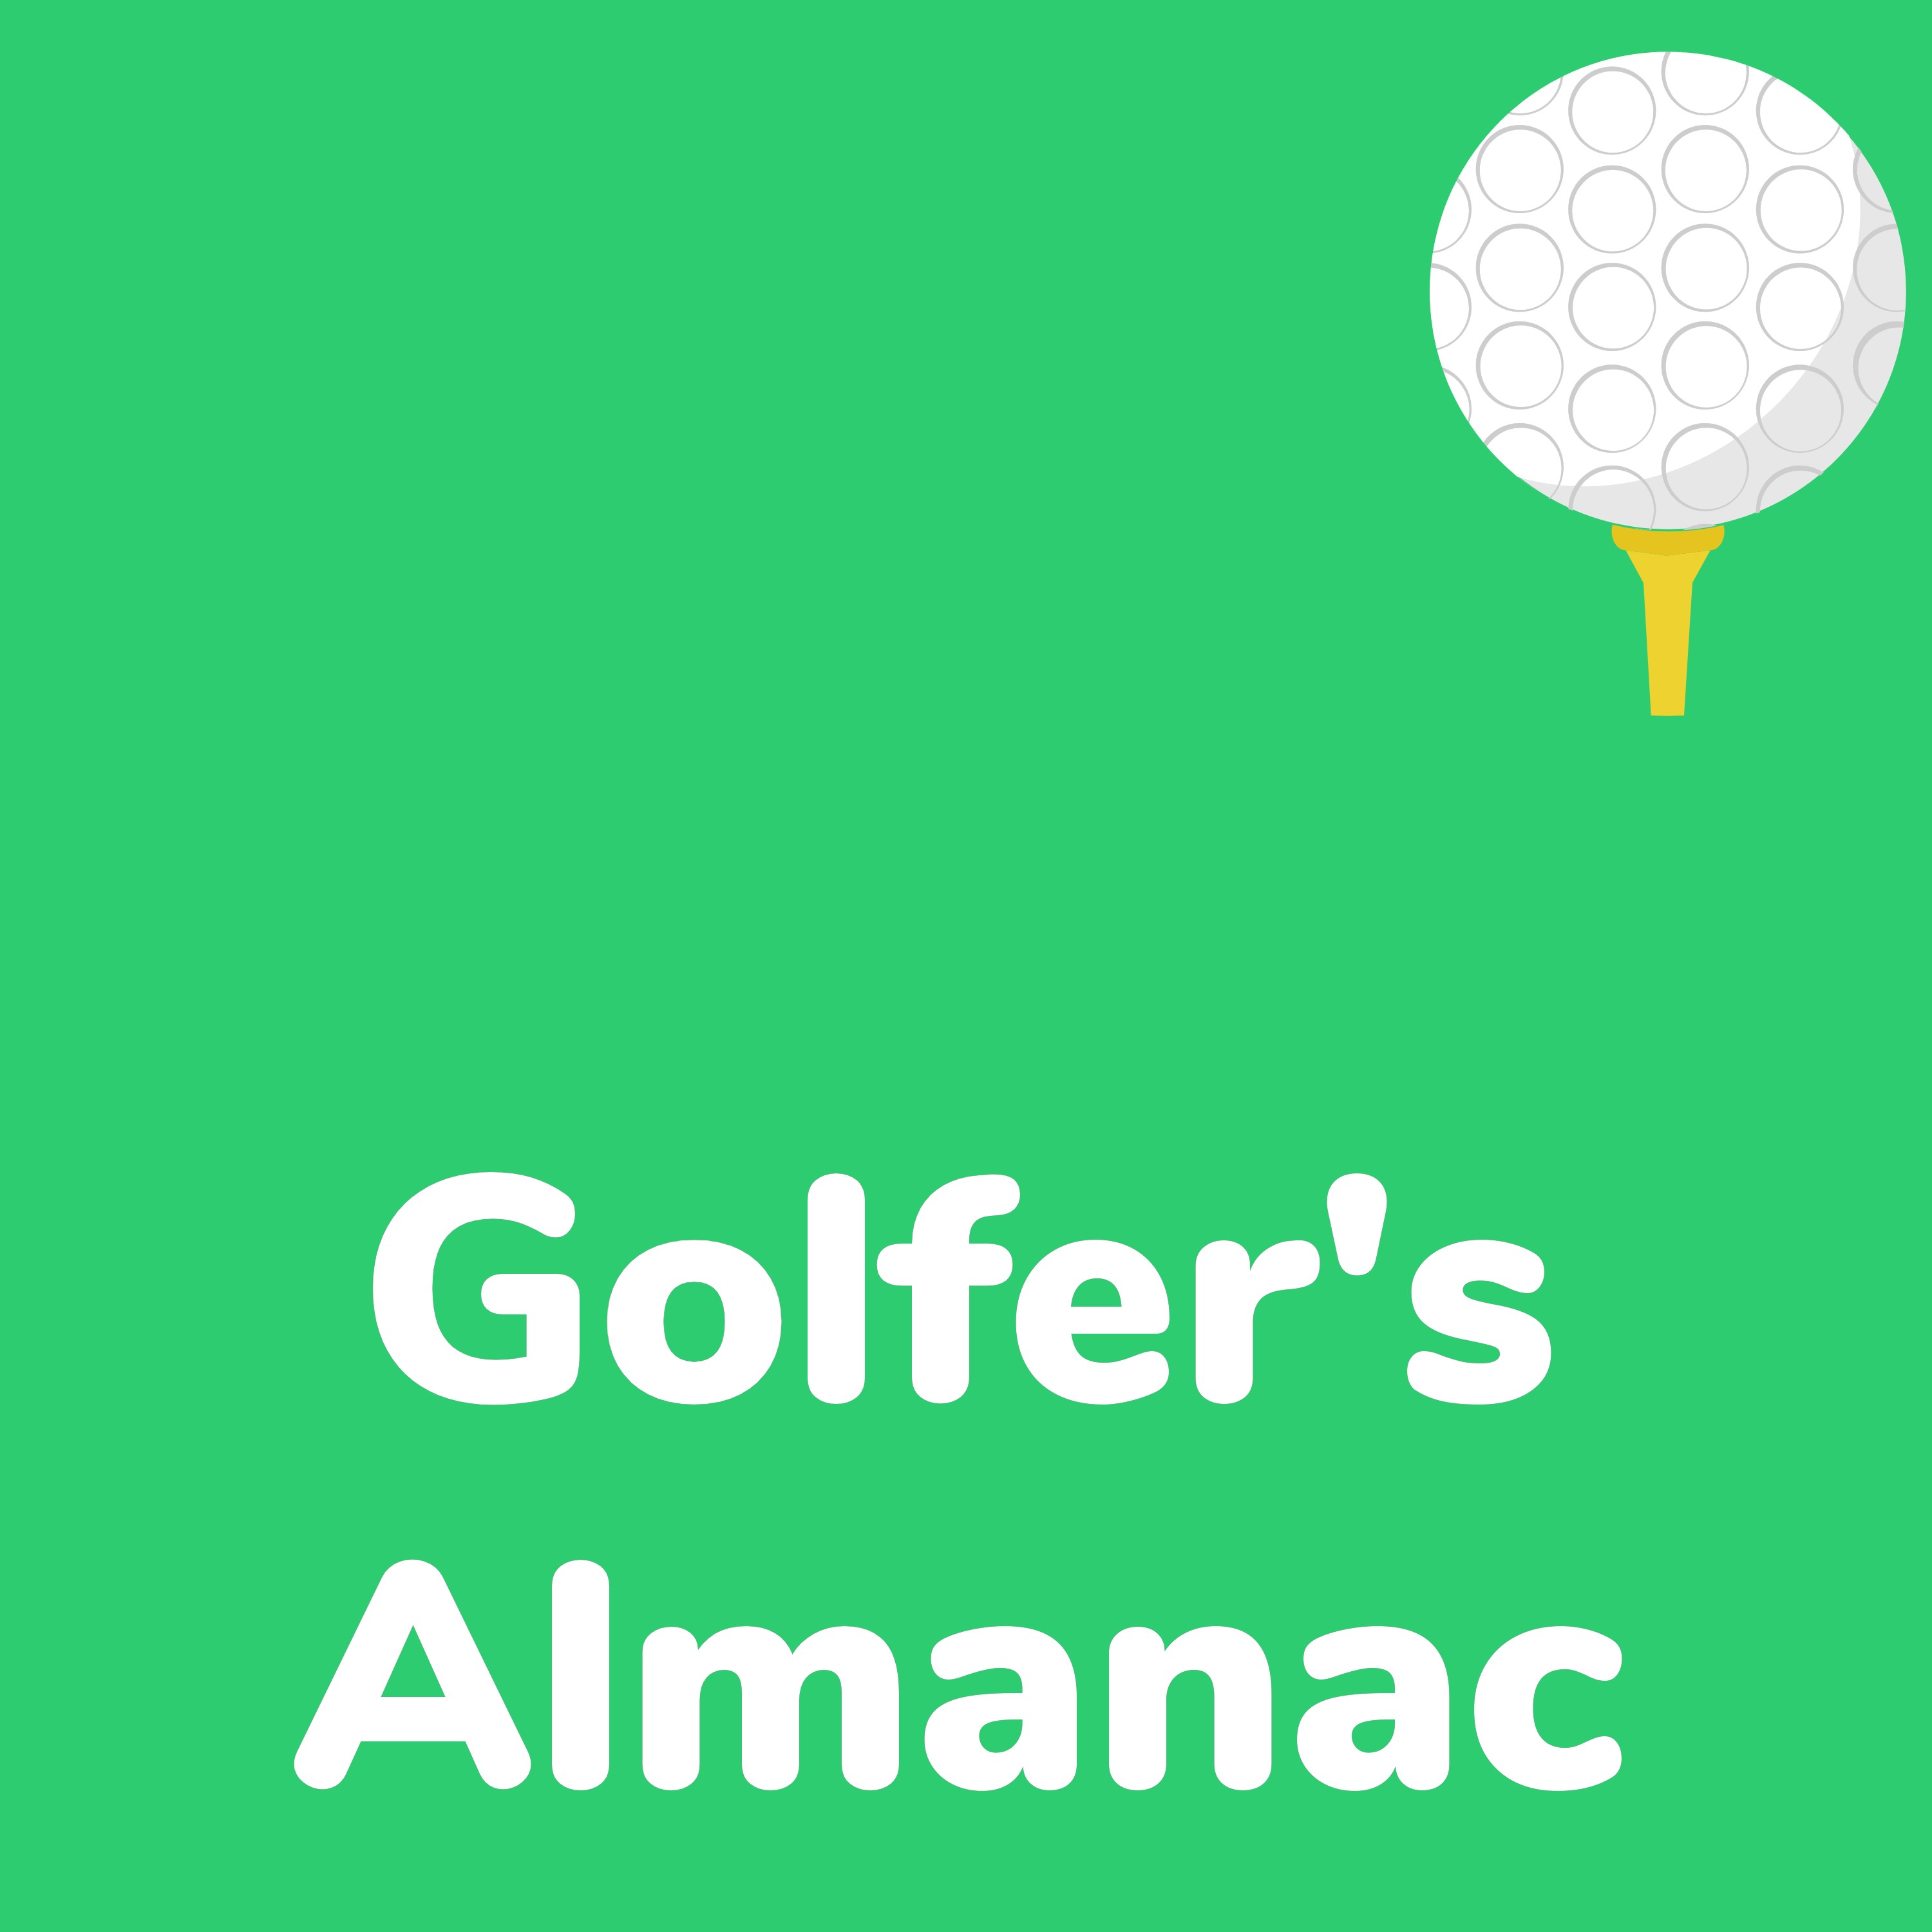 Your Golfers Almanac cover art and Logo by Michael Duranko of GolfToons